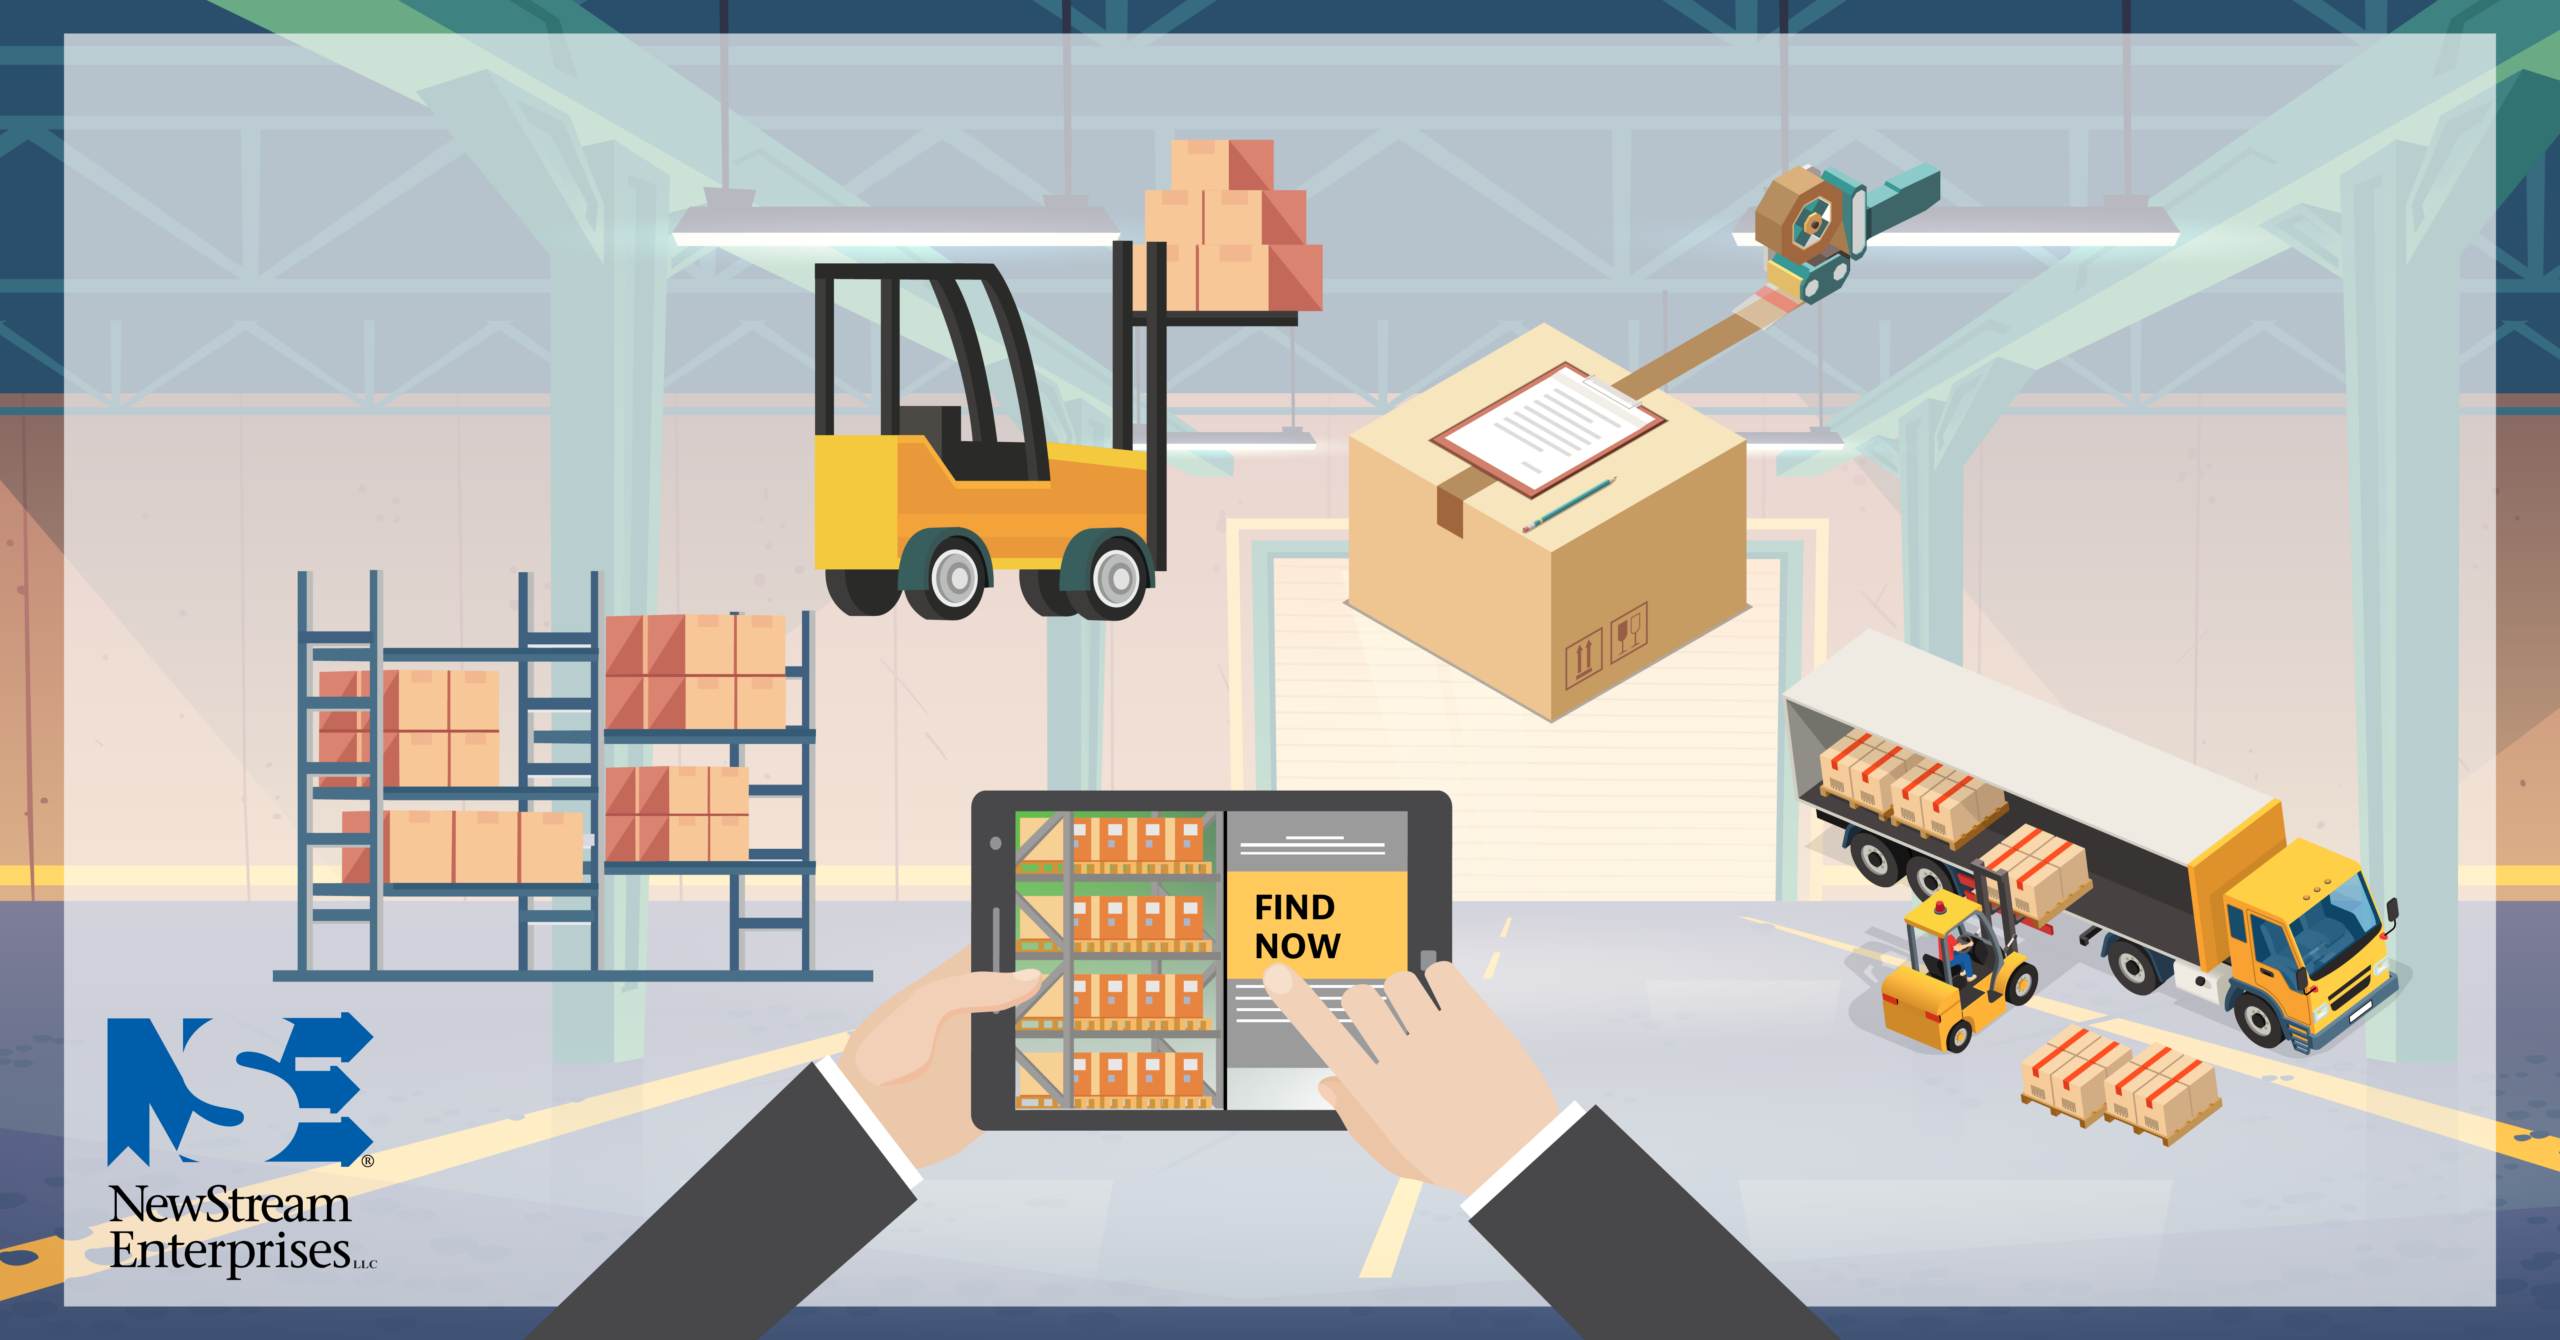 How Does Robotic Automation Affect Supply Chain